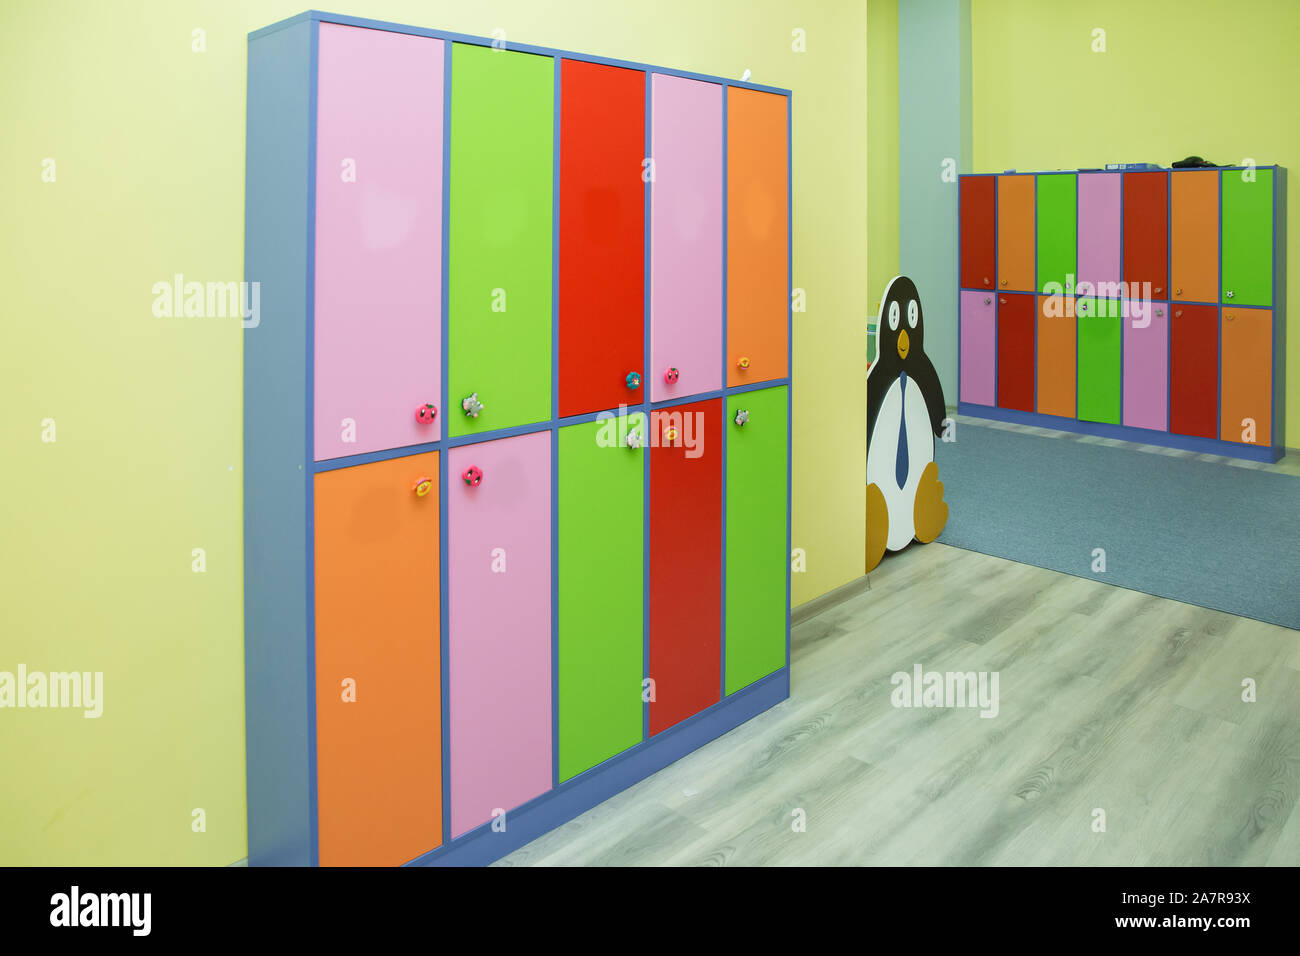 Strong Rows Of Color Lockers In Kindergarden Dressing Room In Pool